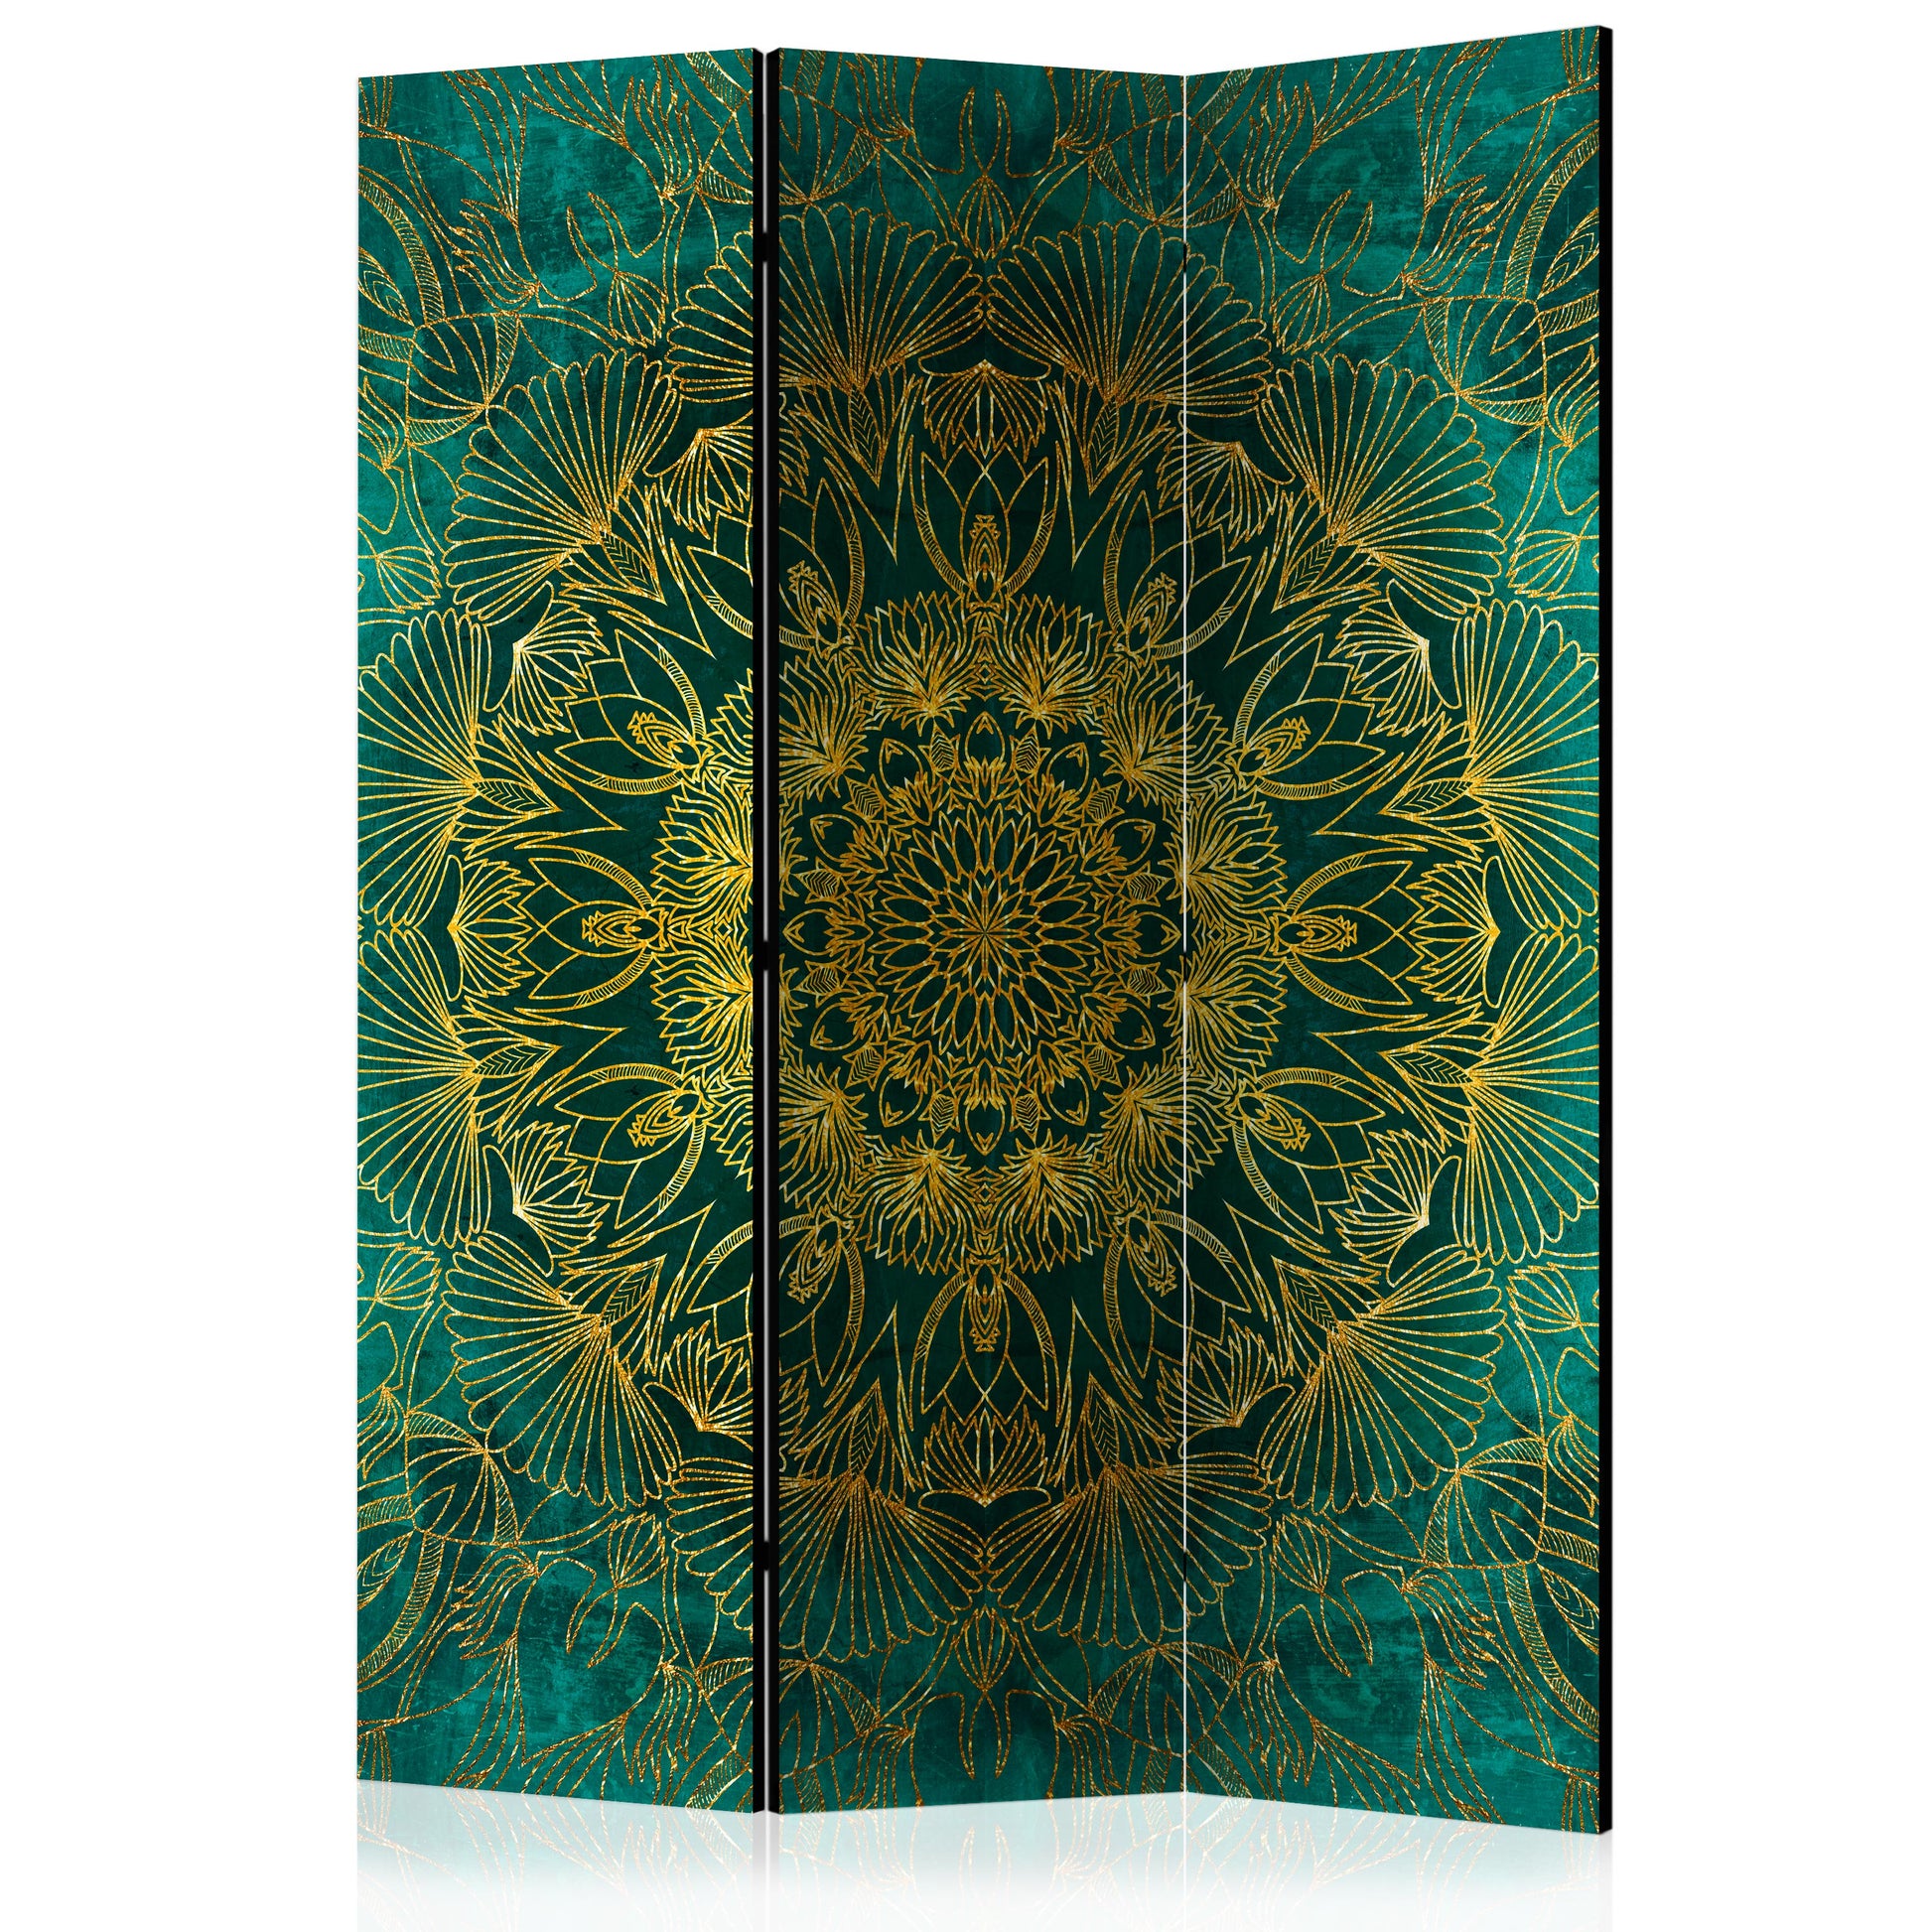 Decorative partition-Room Divider - Royal Stitching-Folding Screen Wall Panel by ArtfulPrivacy